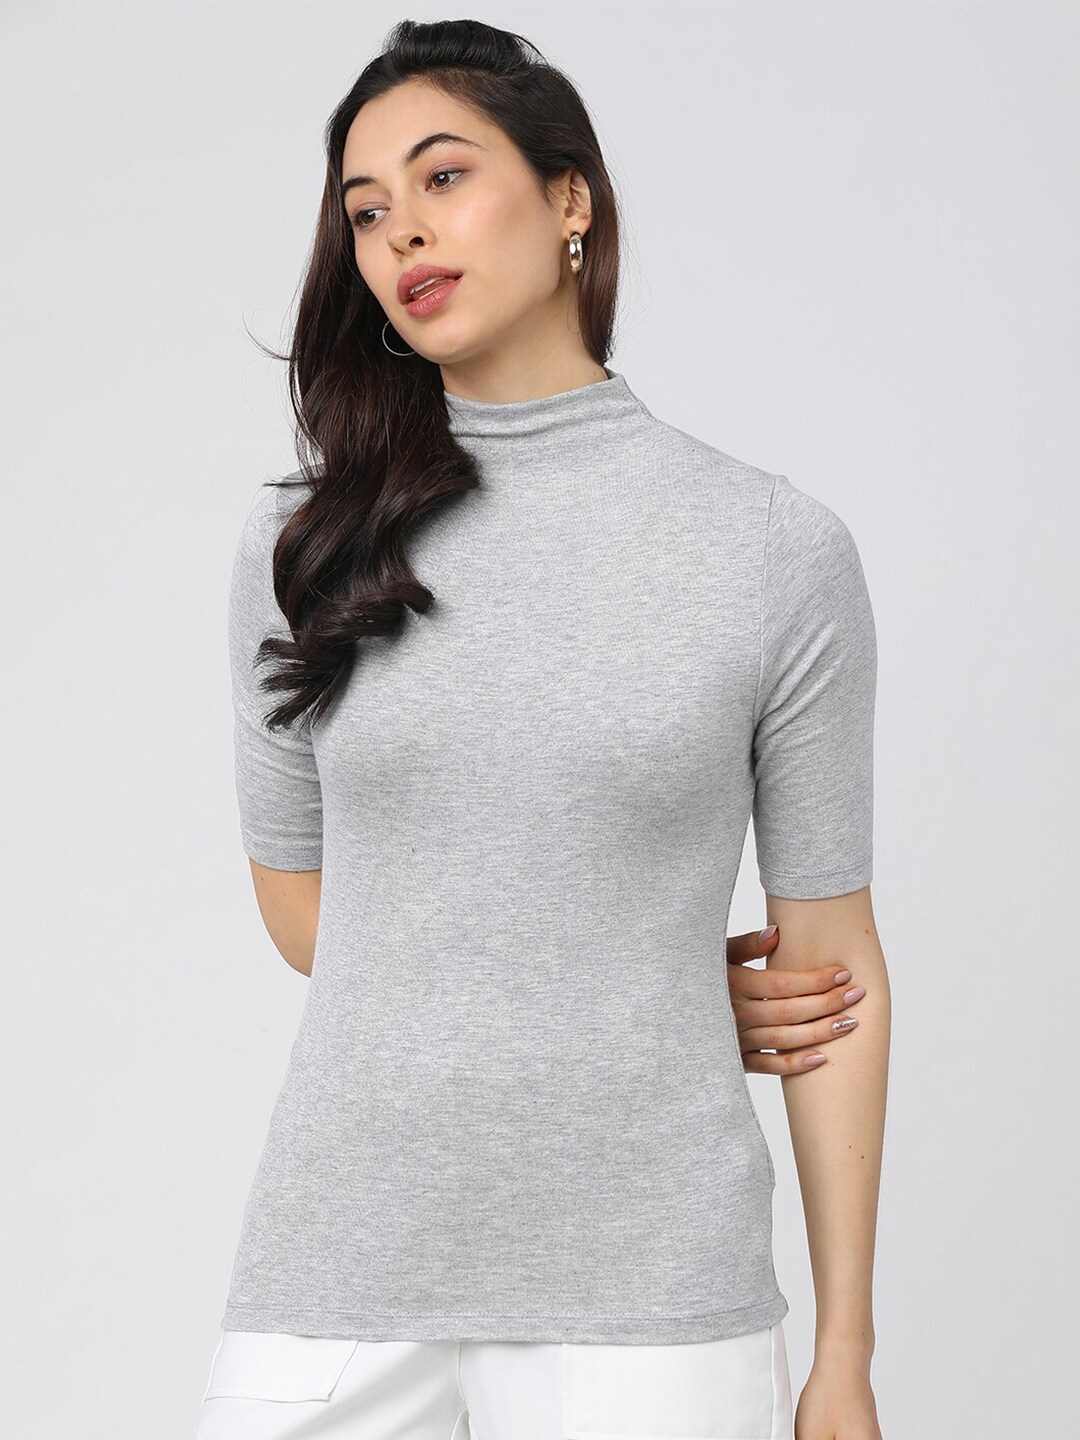 Tokyo Talkies Grey High Neck Fitted Top Price in India